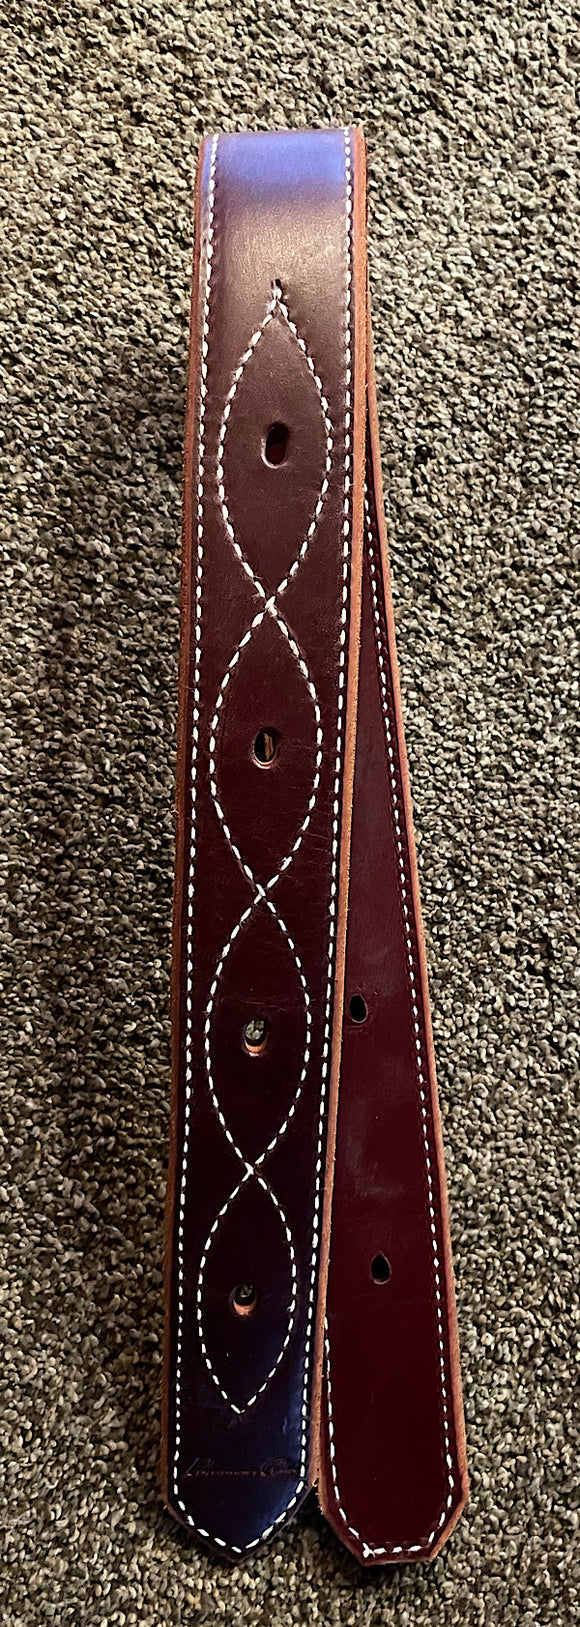 Professionals Choice doubled and stitched, burgundy leather off billet